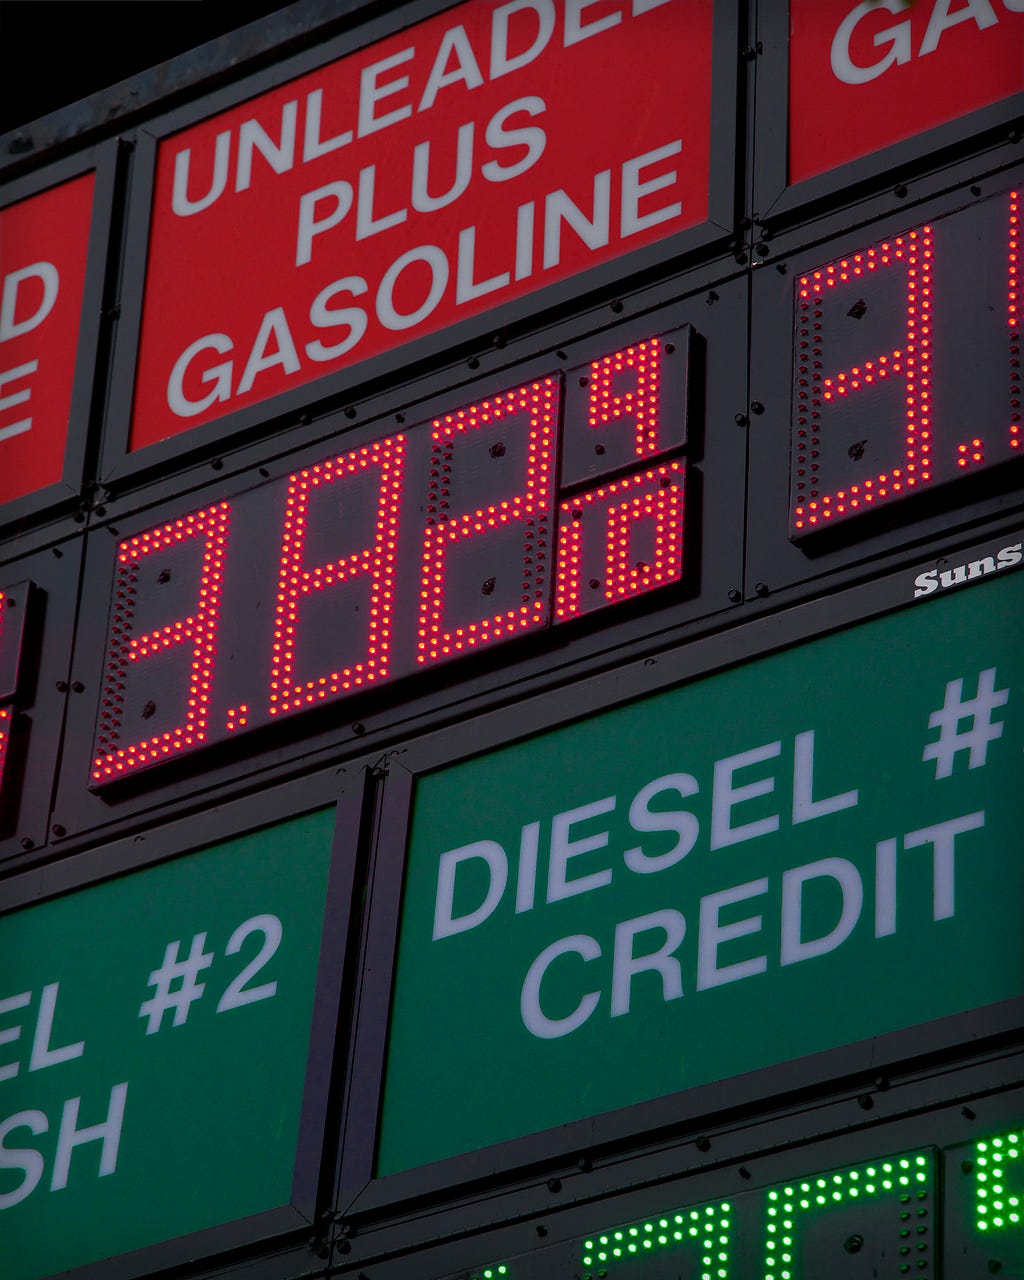 A display board displaying the rate of gasoline and diesel, signifying inflation.